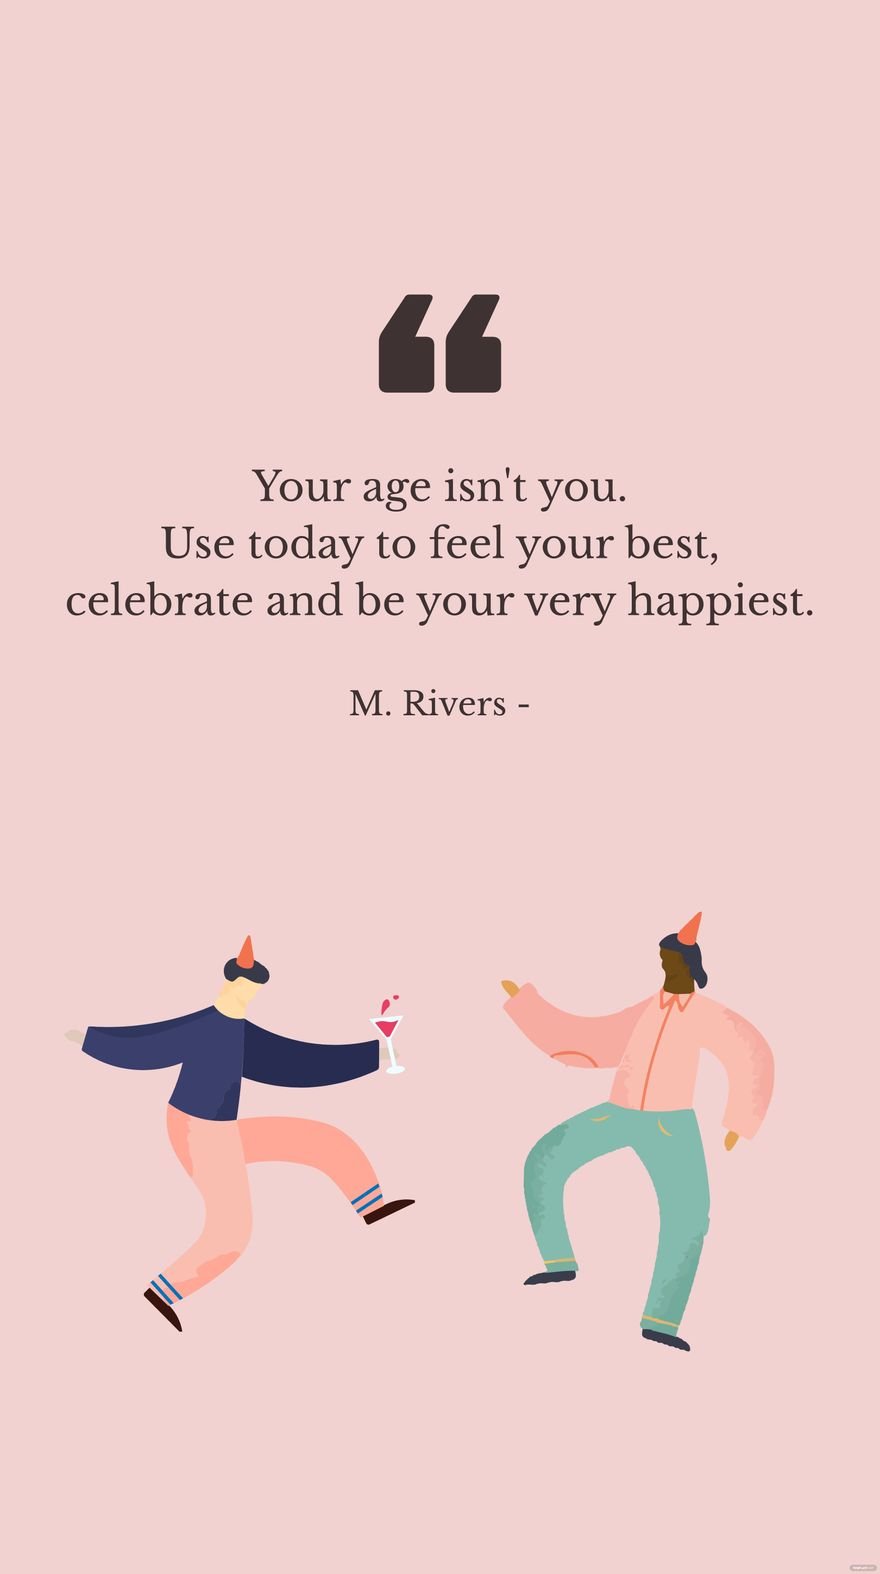 M. Rivers - Your age isn't you. Use today to feel your best, celebrate and be your very happiest.